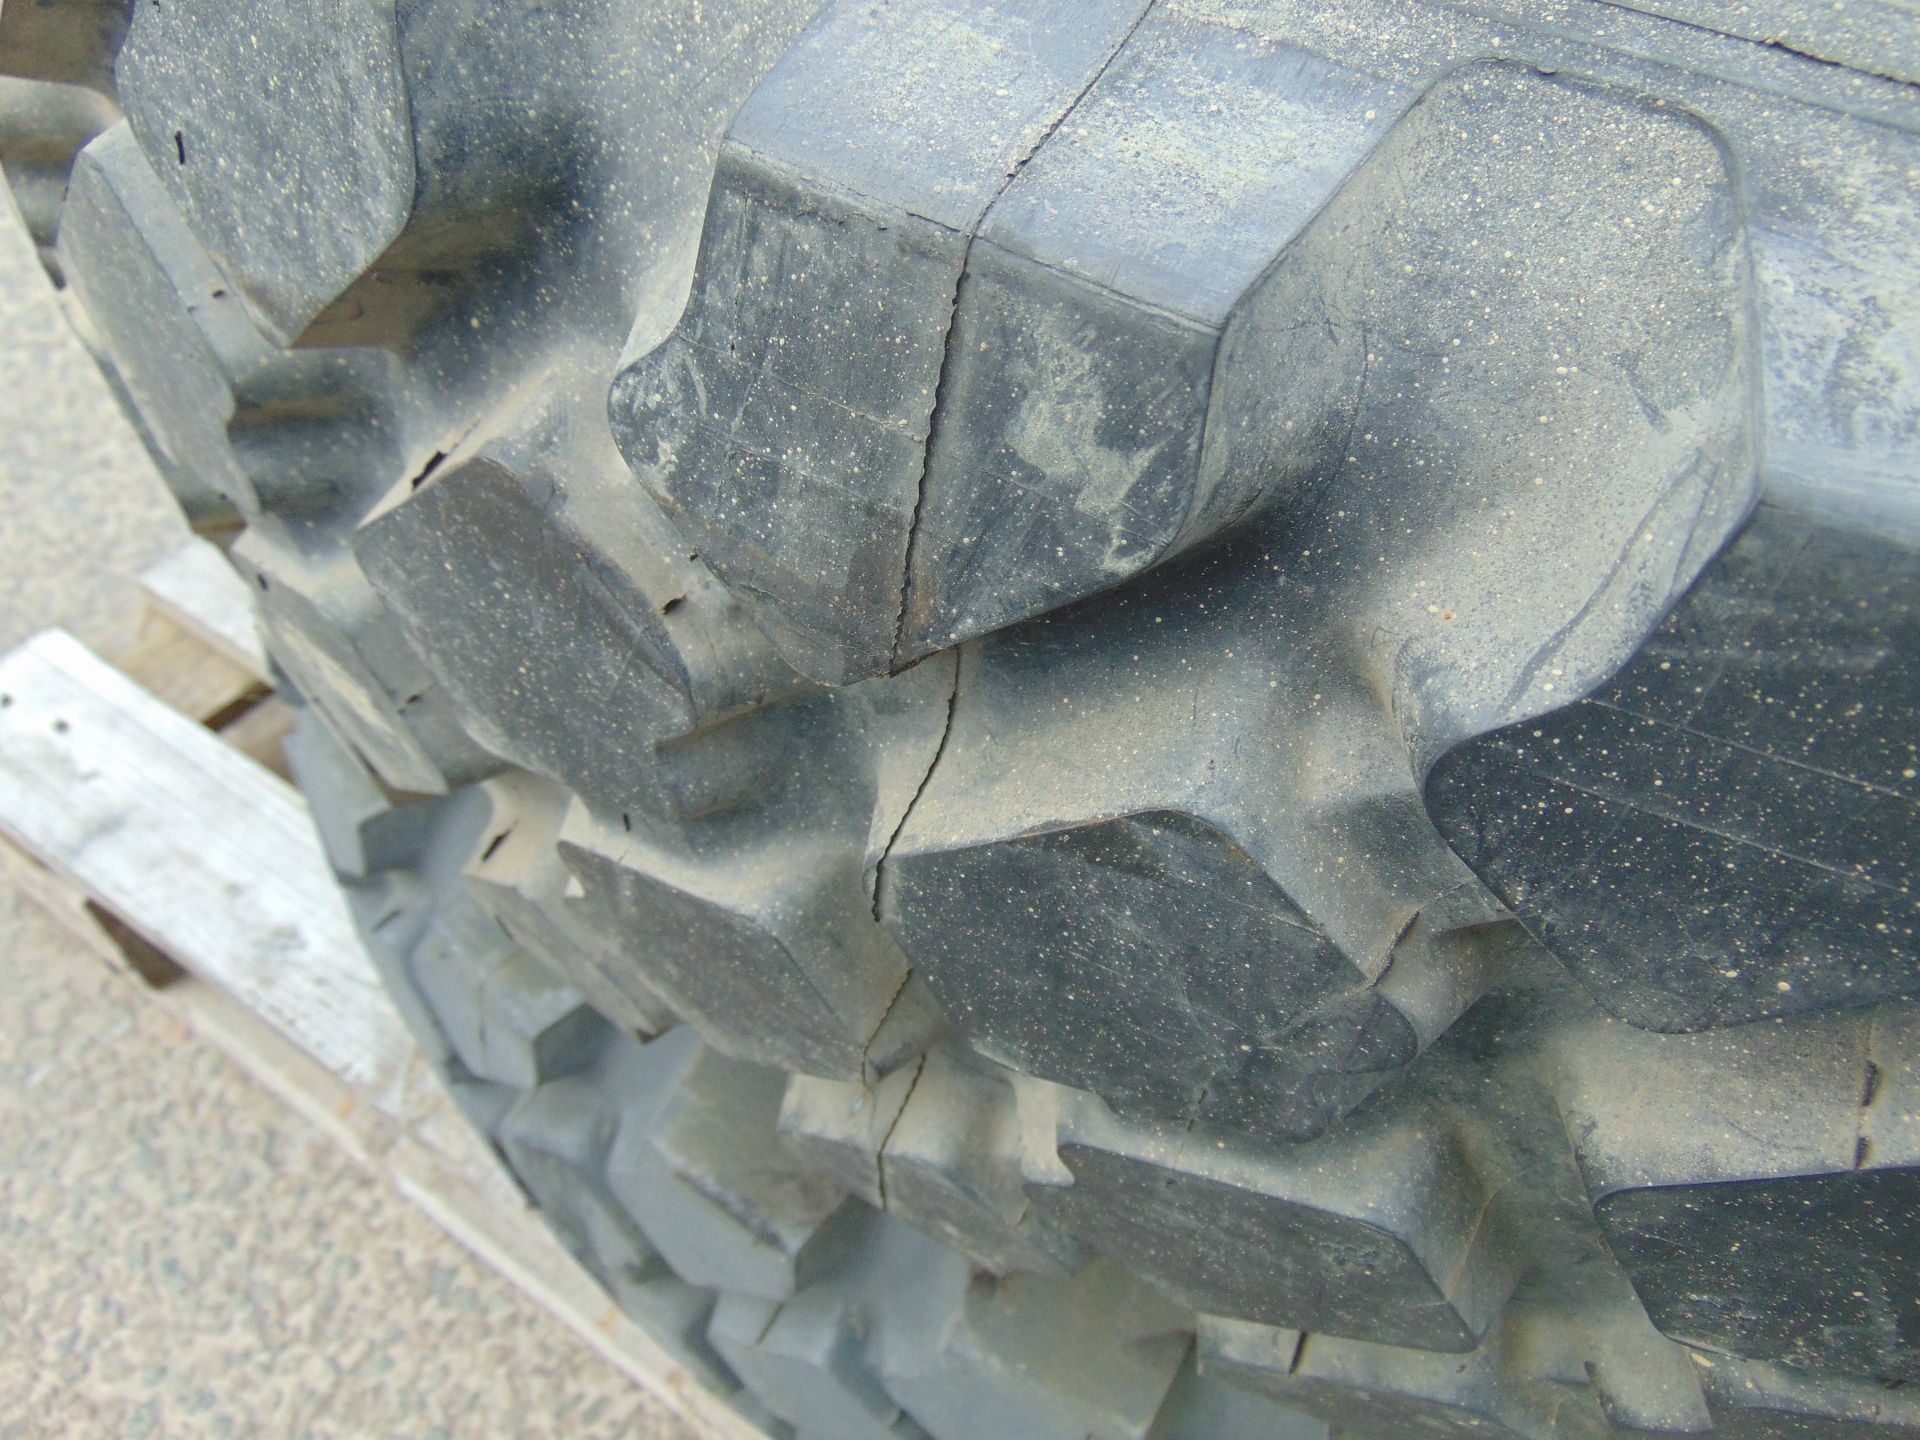 2 x Michelin XZL 12.00 R20 Tyres Complete With 8 Stud Rims - Image 5 of 5